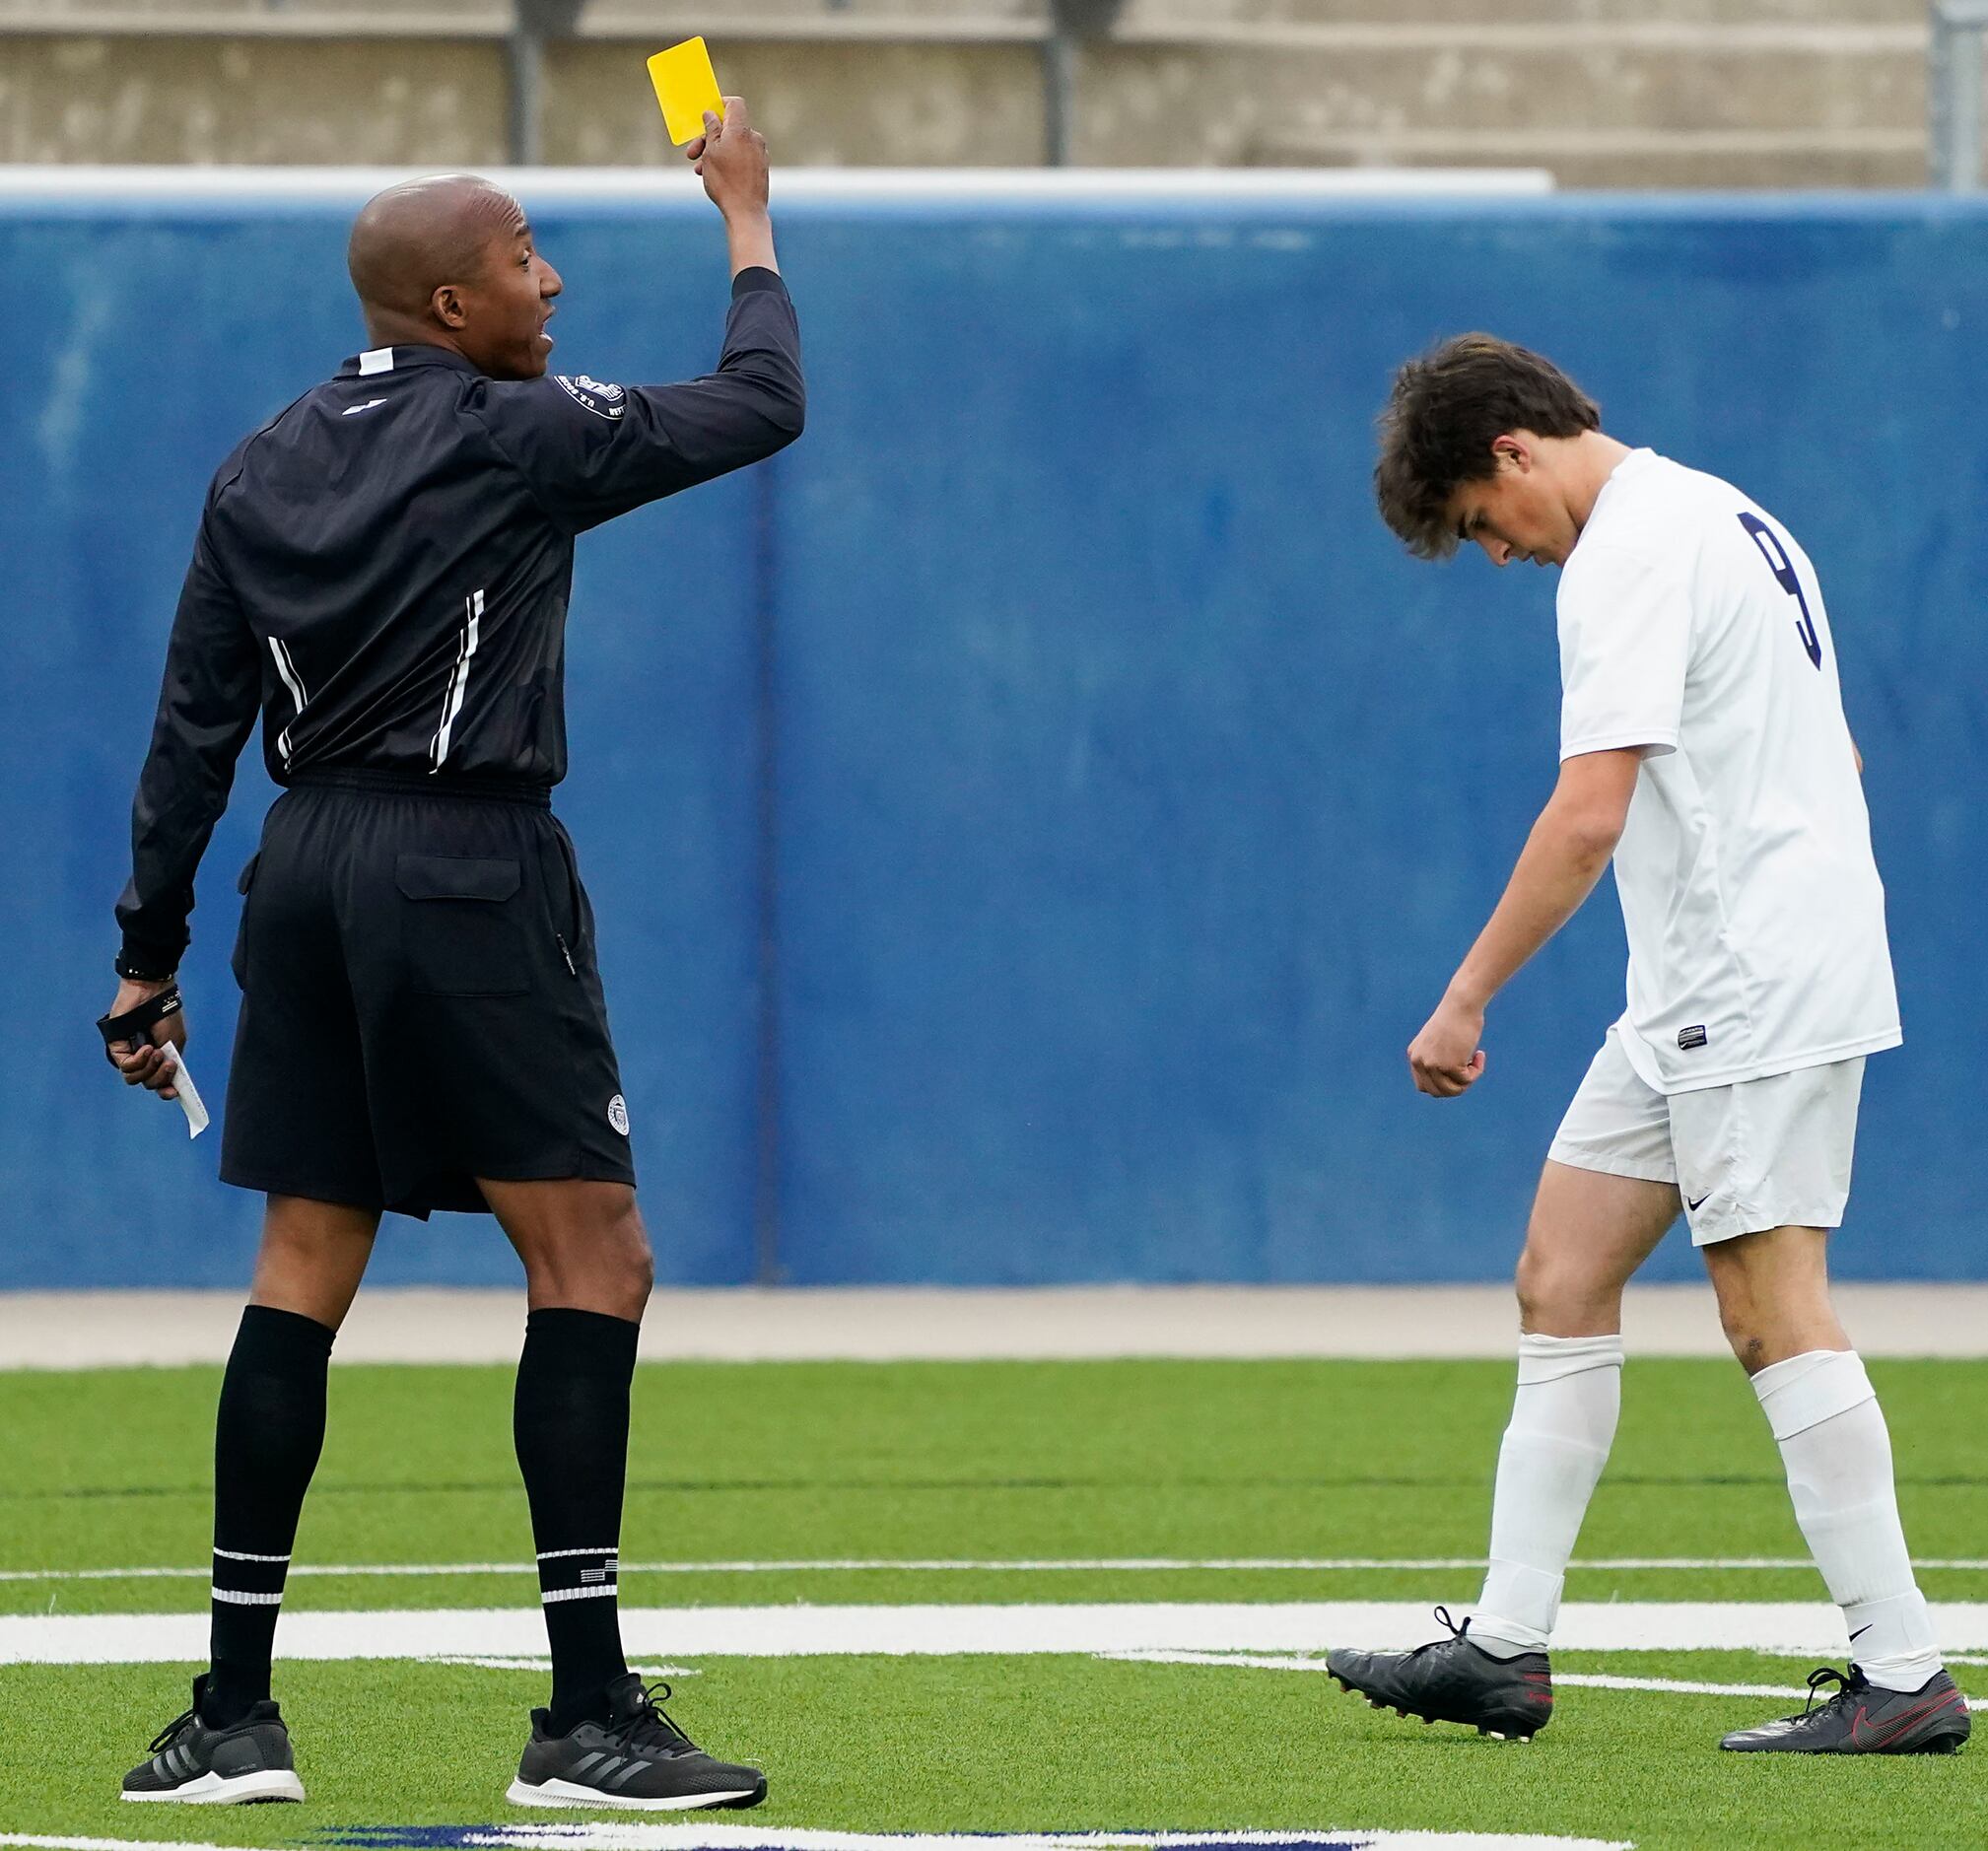 Jesuit midfielder Grant Koshakji heads to the bench as he is issued a yellow card during a...